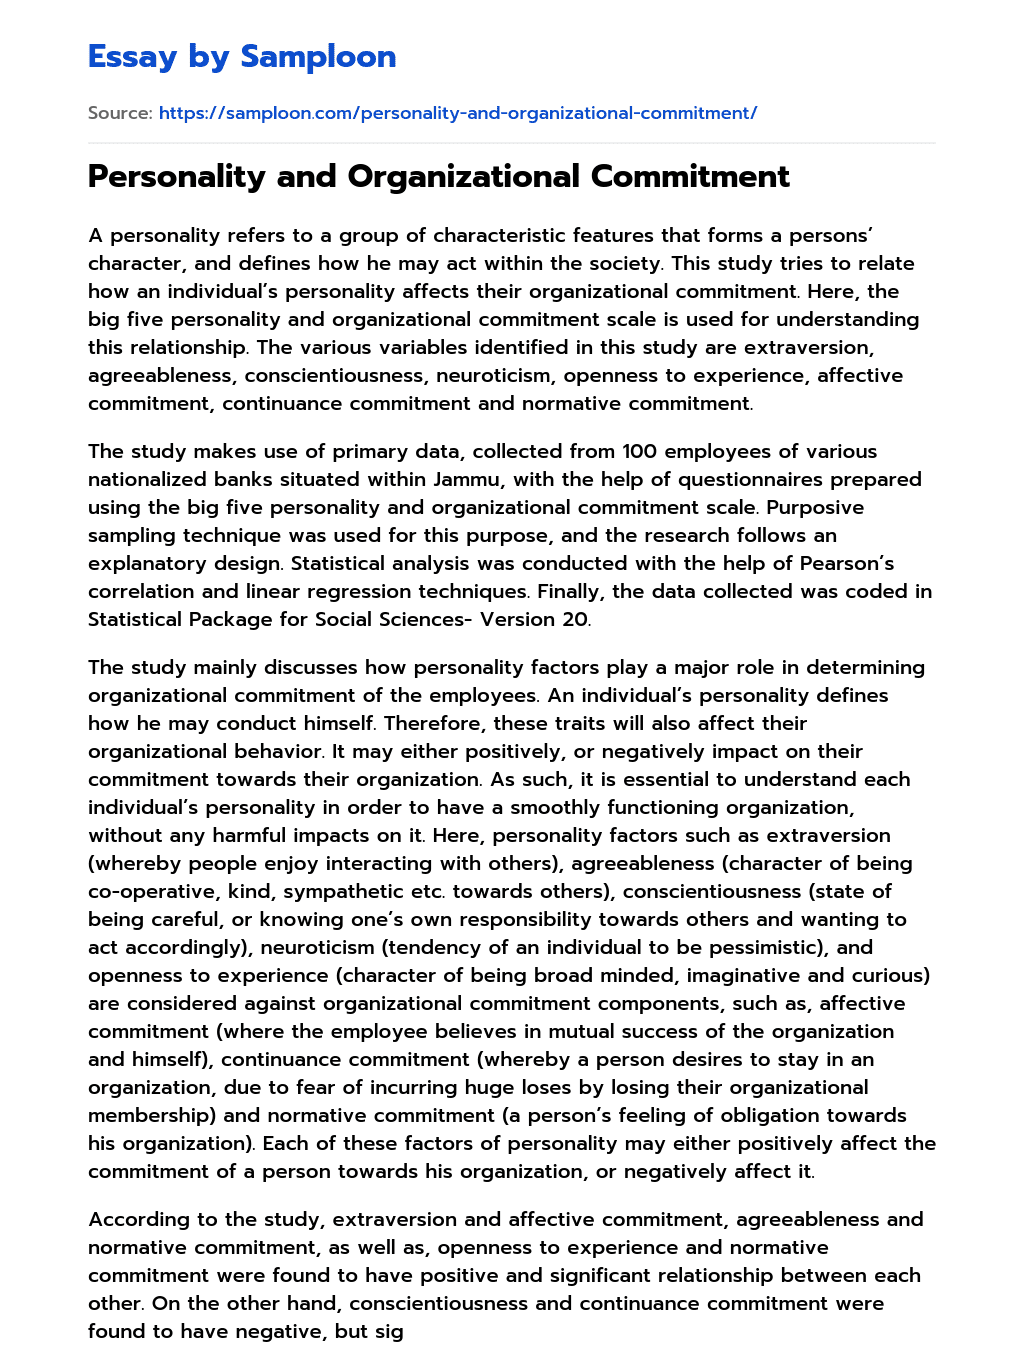 Personality and Organizational Commitment essay